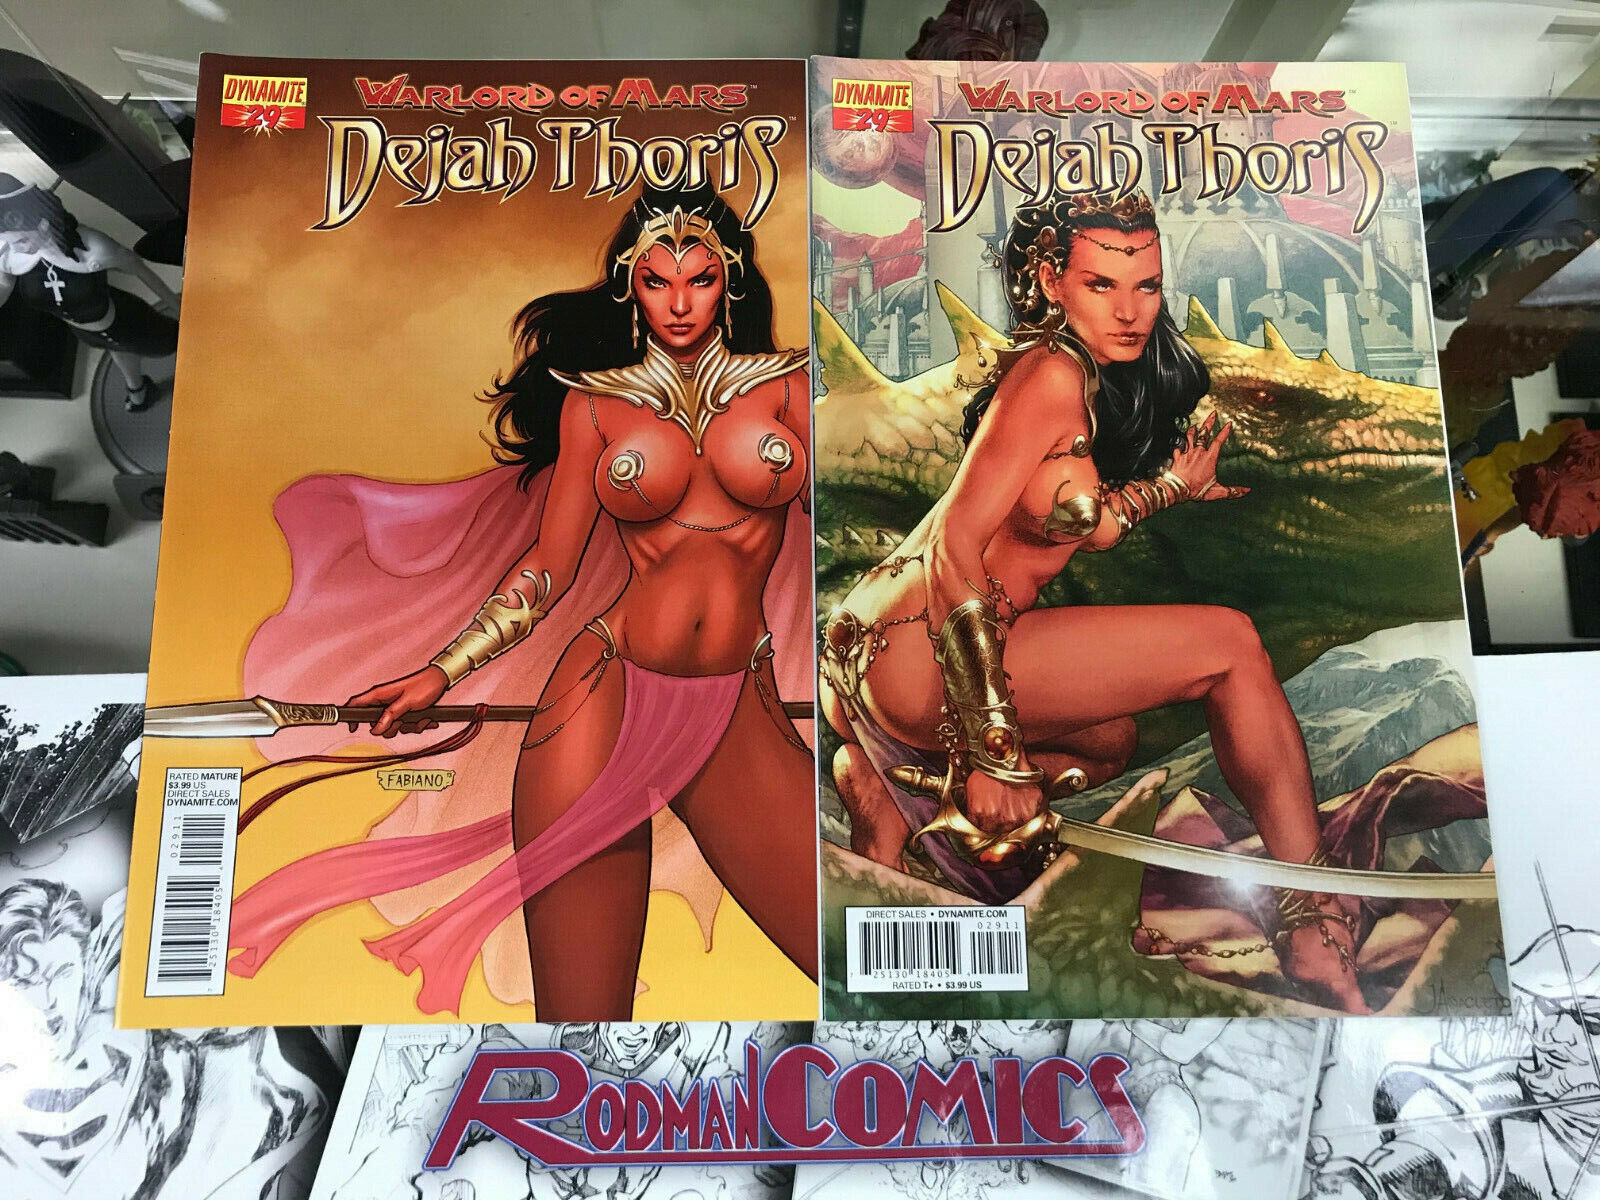 Warlord of Mars Dejah Thoris 29 Jay Anceleto Variant Cover and Fabiano Neves NM